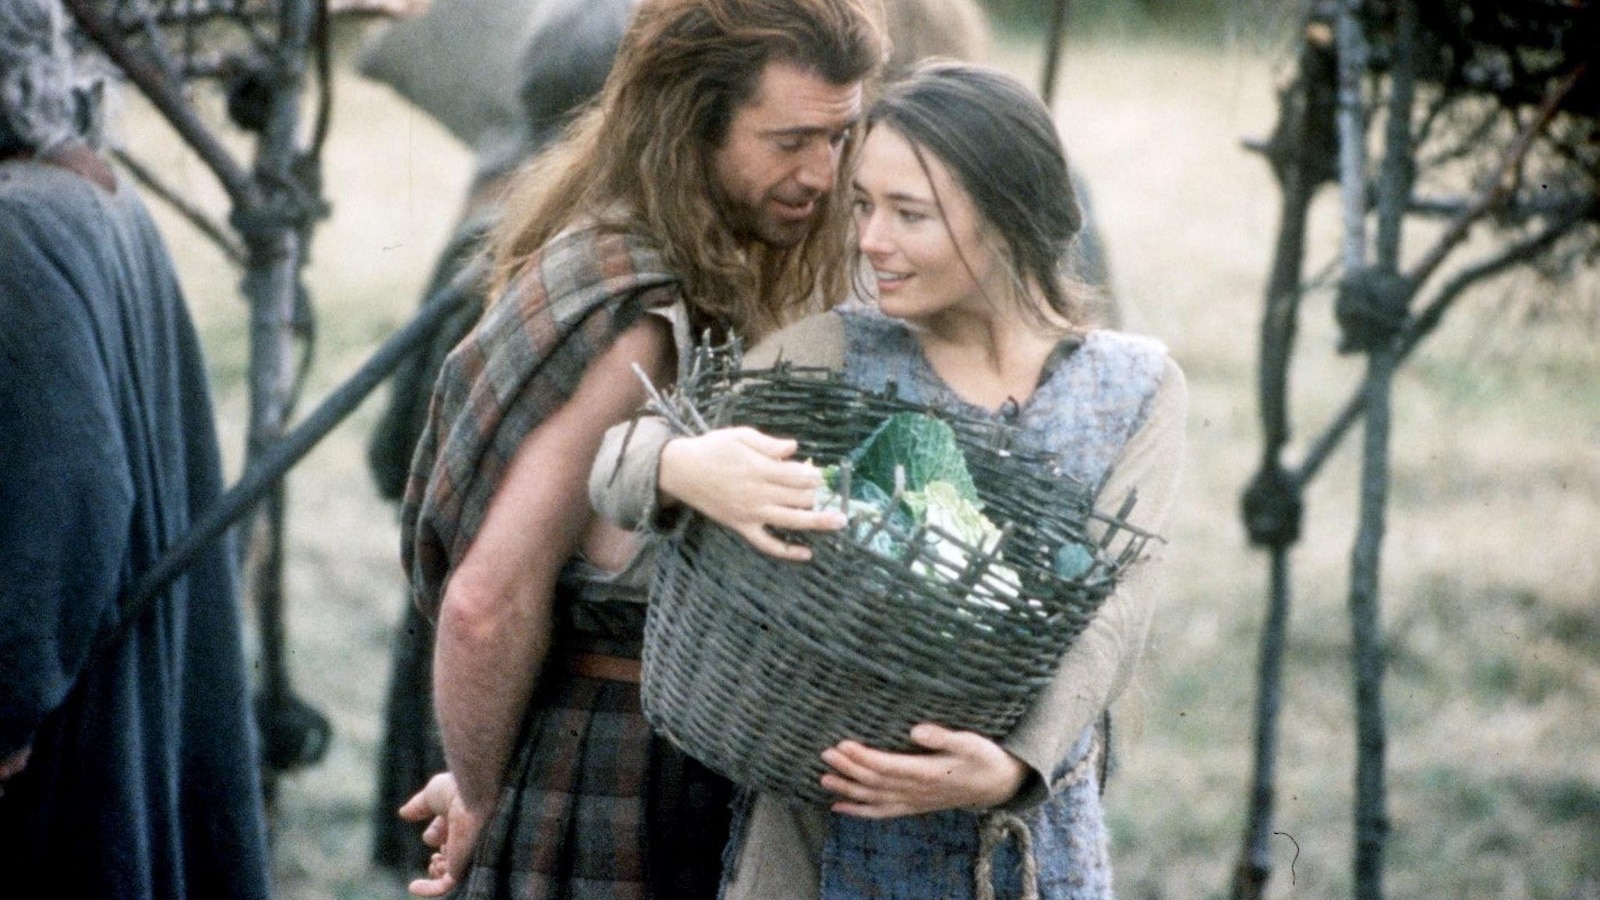 A man wearing a plaid behind a woman carrying a basket (Mel Gibson).